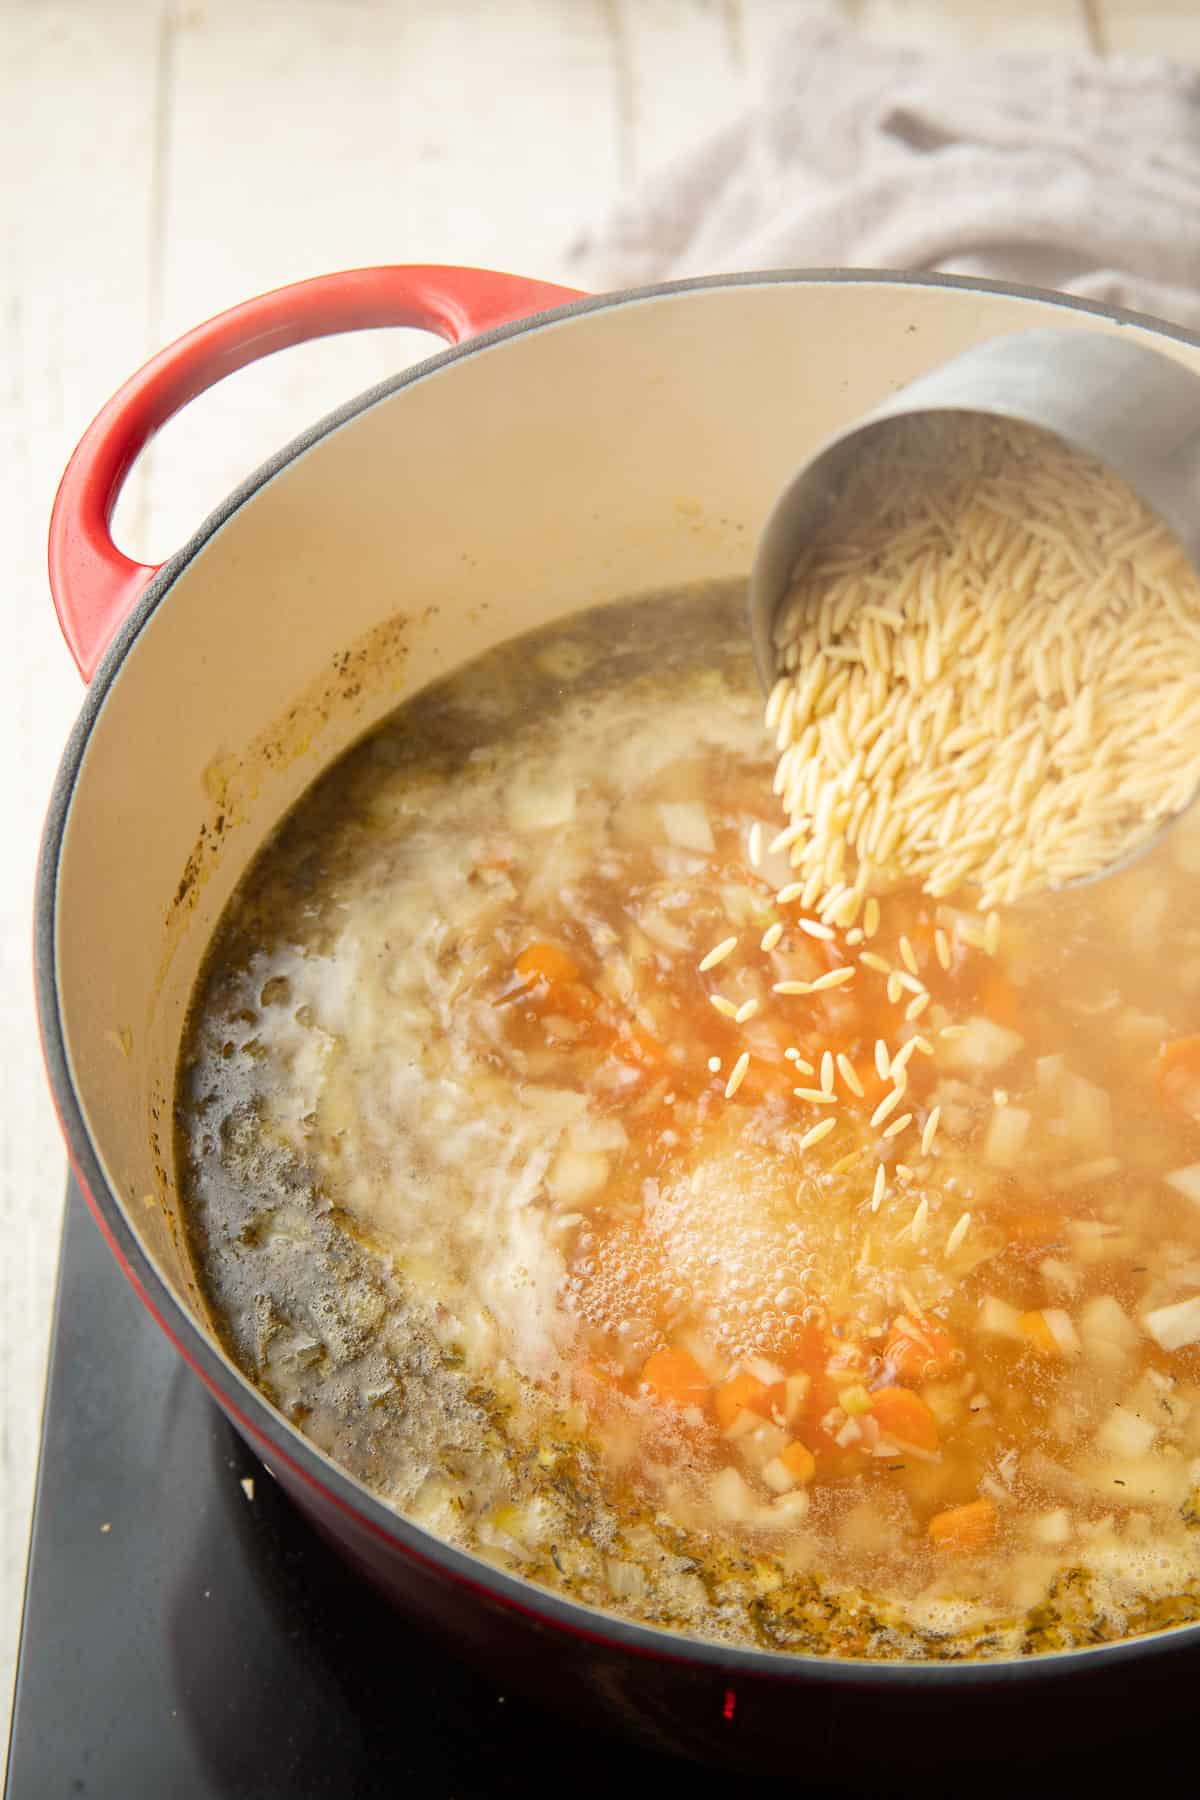 Dried orzo being poured into a pot of simmering soup.